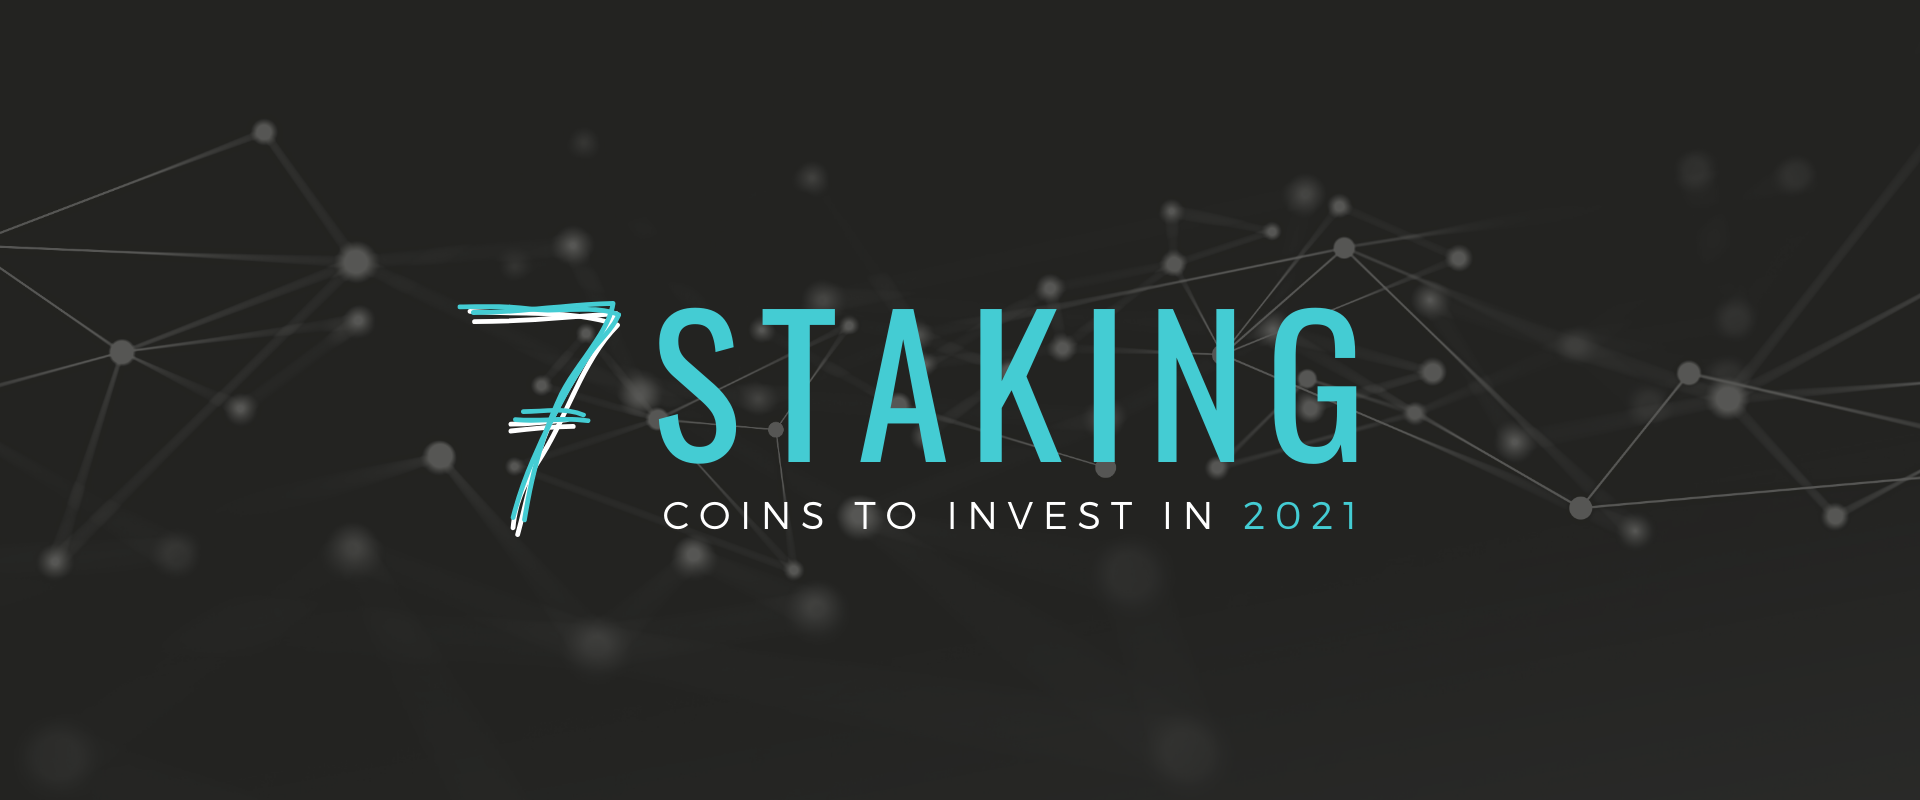 7 Staking Coins To Invest In 2021.png